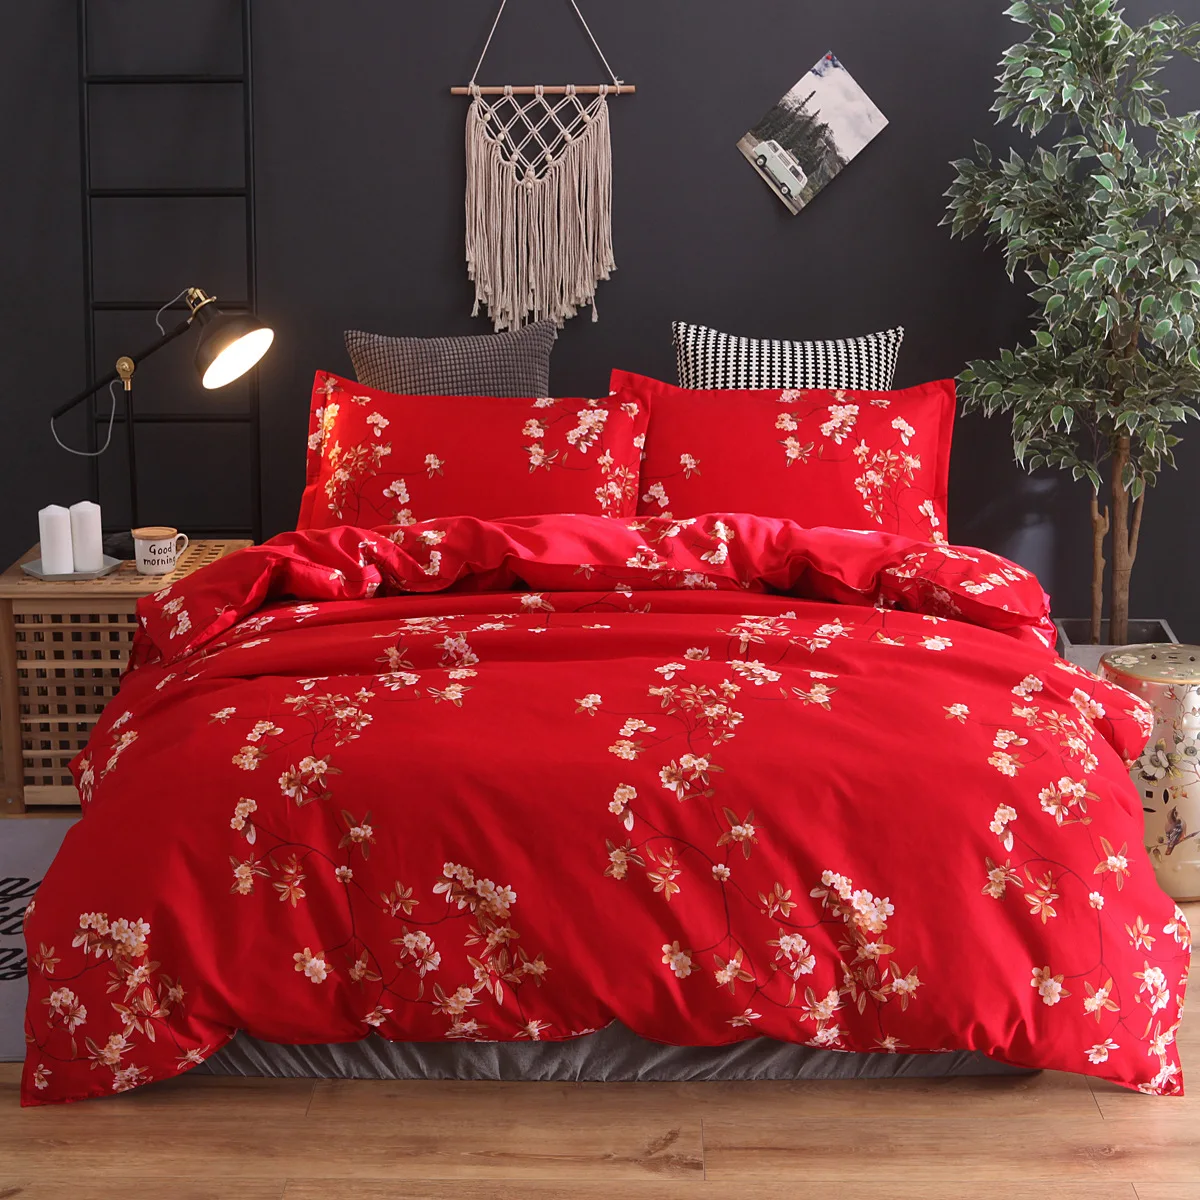 Romantic Red Bedding Sets Queen Size Bed Sheet Sets Quilt Cover